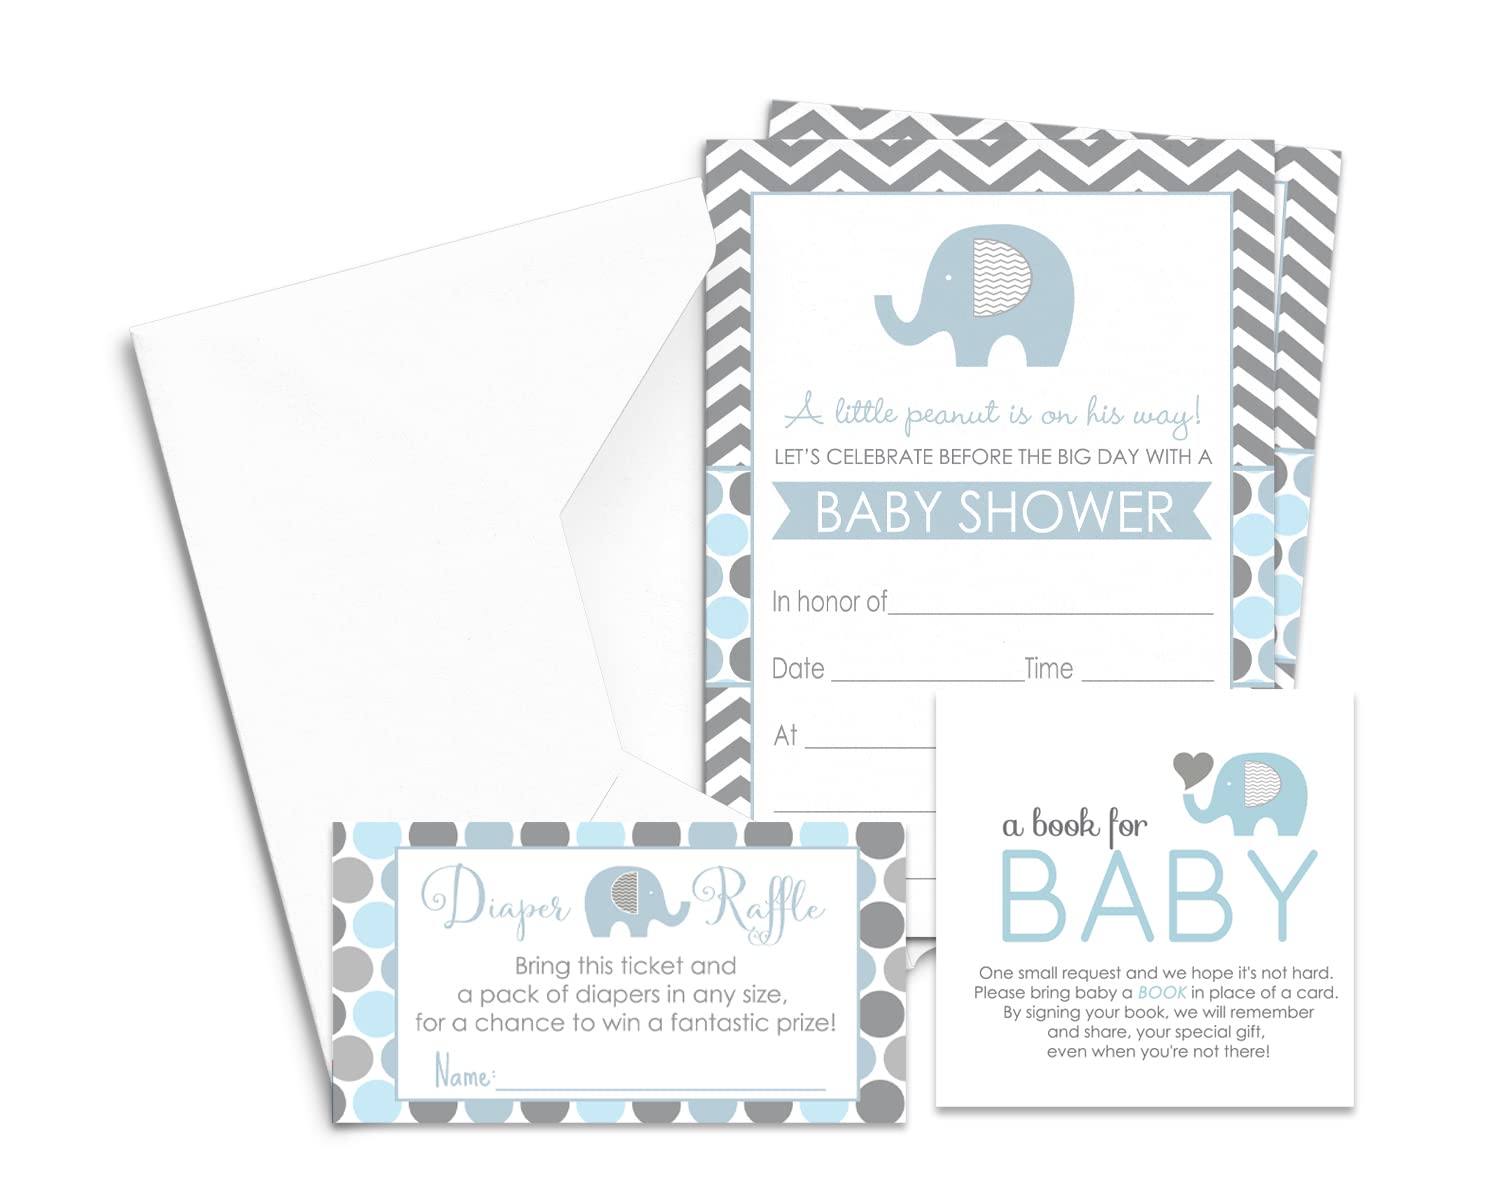 Paper Clever Party Blue Elephant Baby Shower Invitation BundlePaper Clever Party